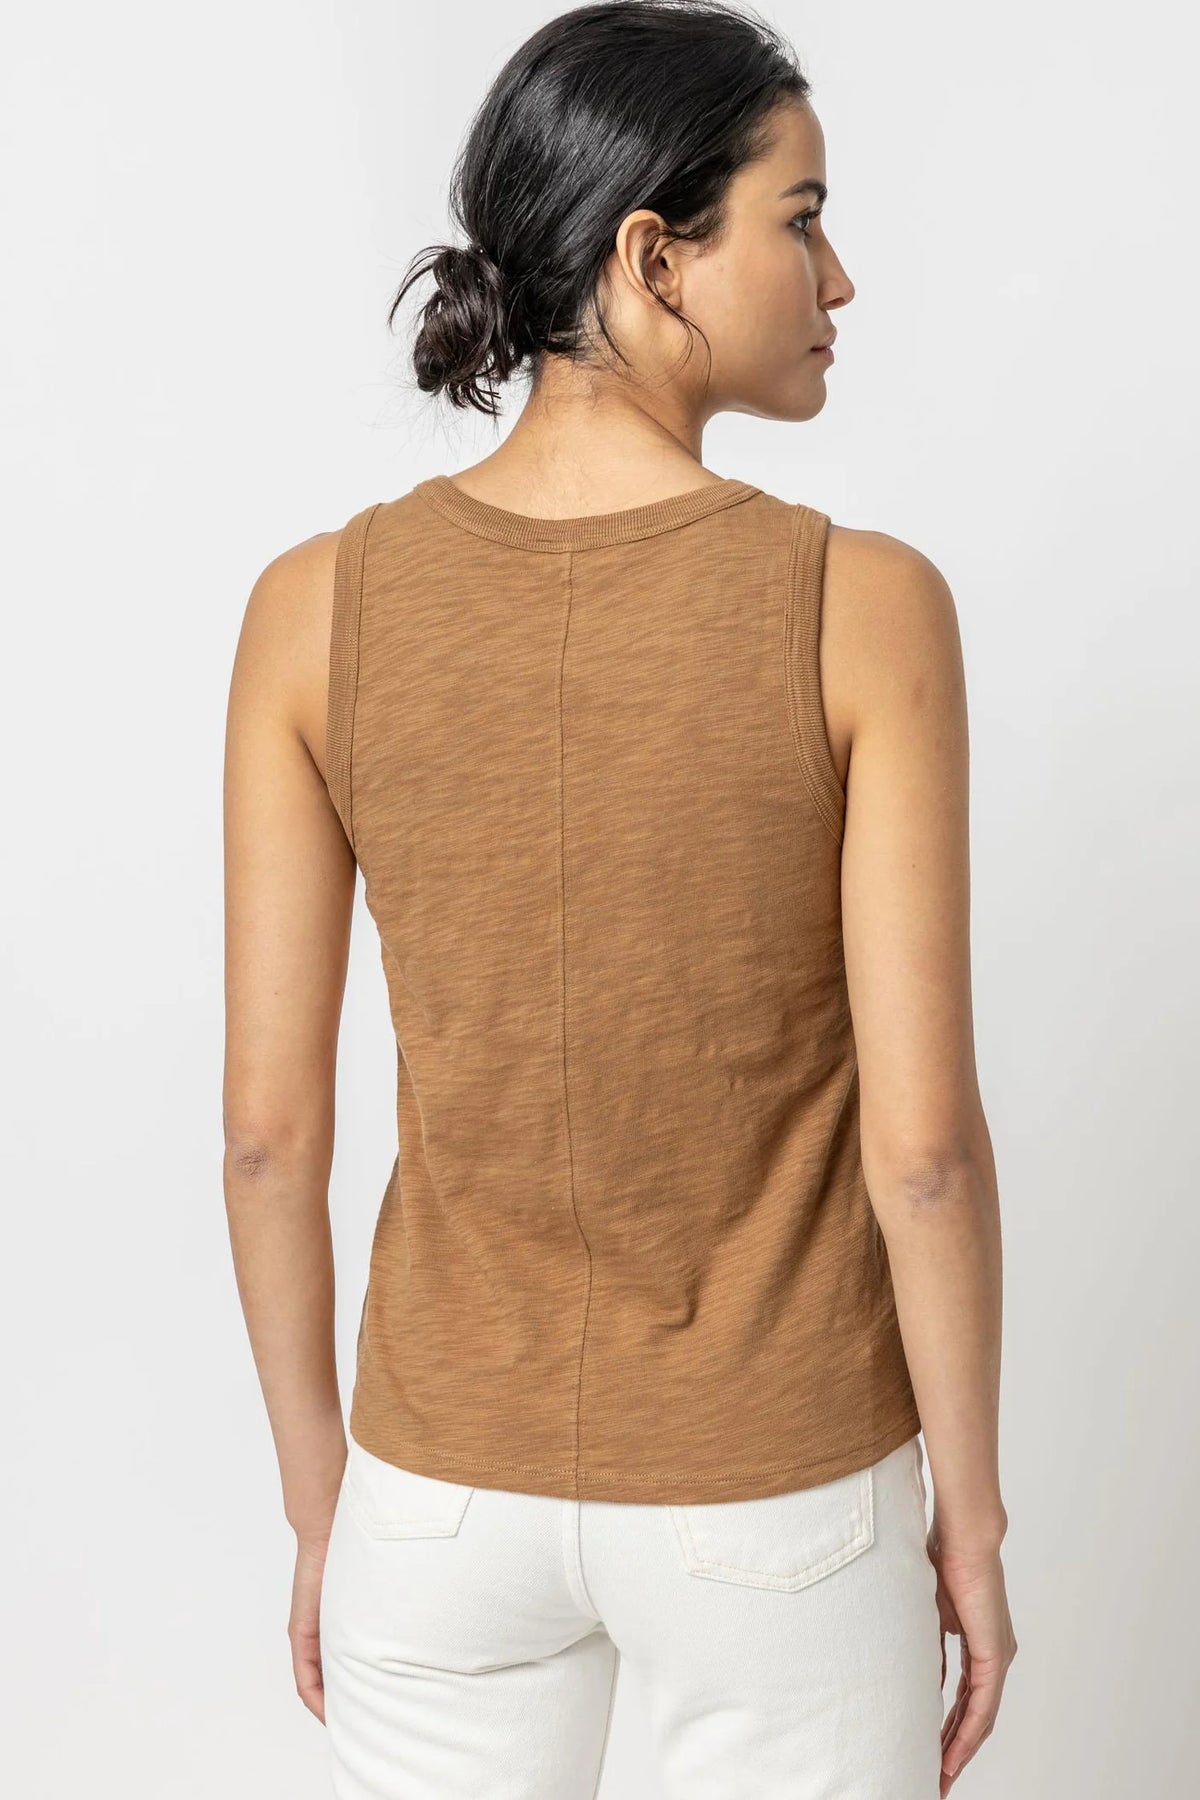 Back Seam Tank in Russet